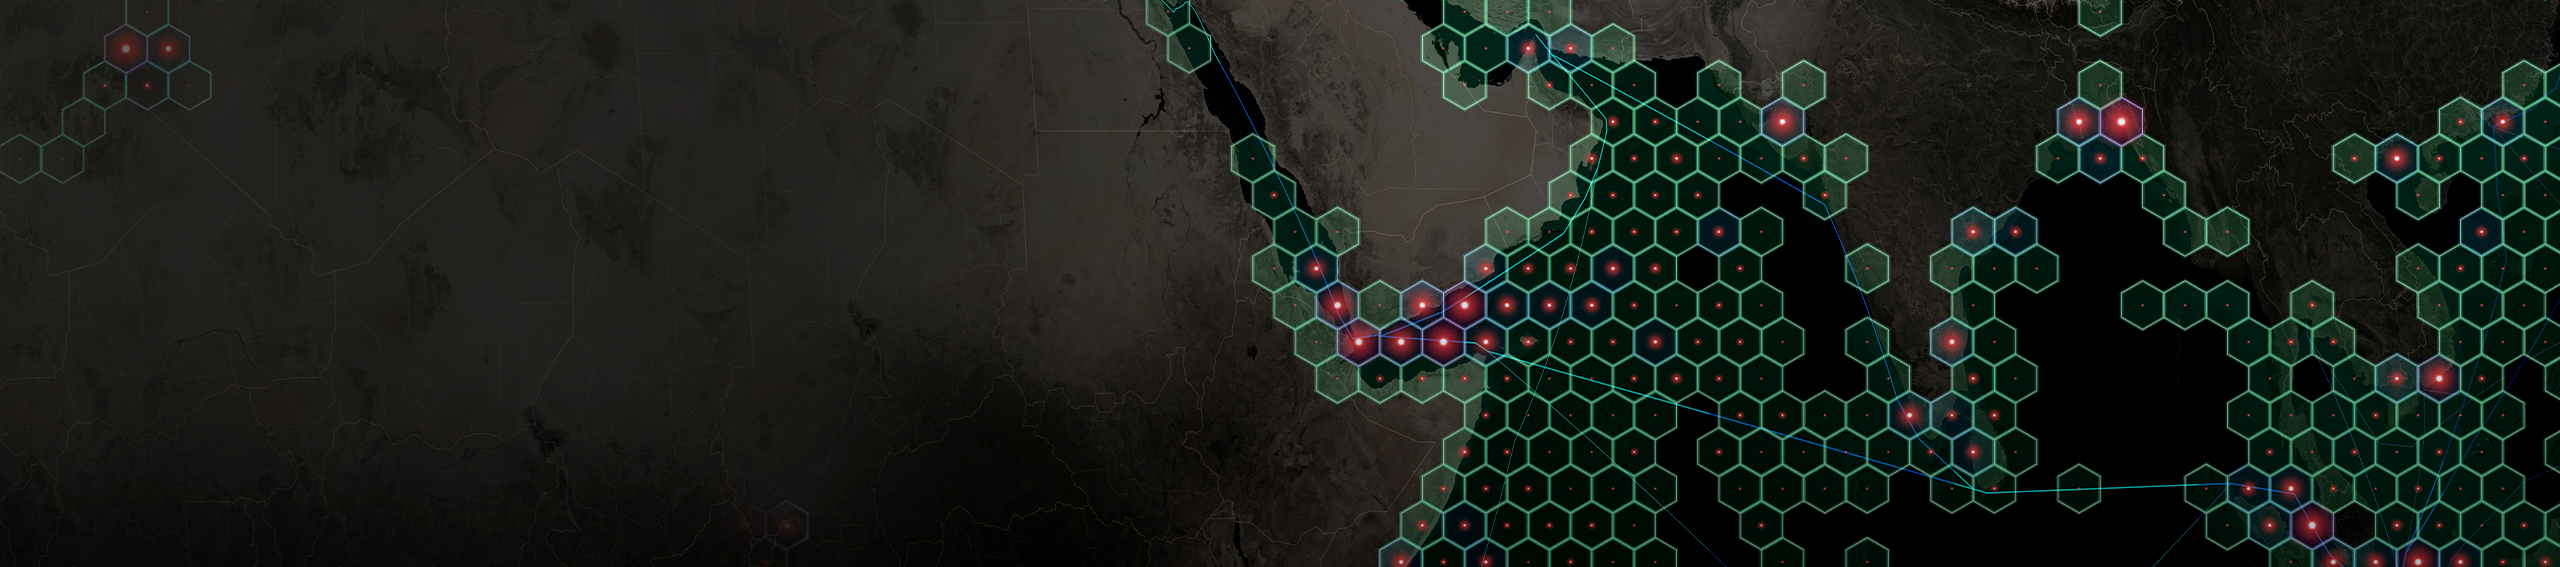 A dark grey map visualizing data with overlaid nesting green hexagons containing glowing pink dots 